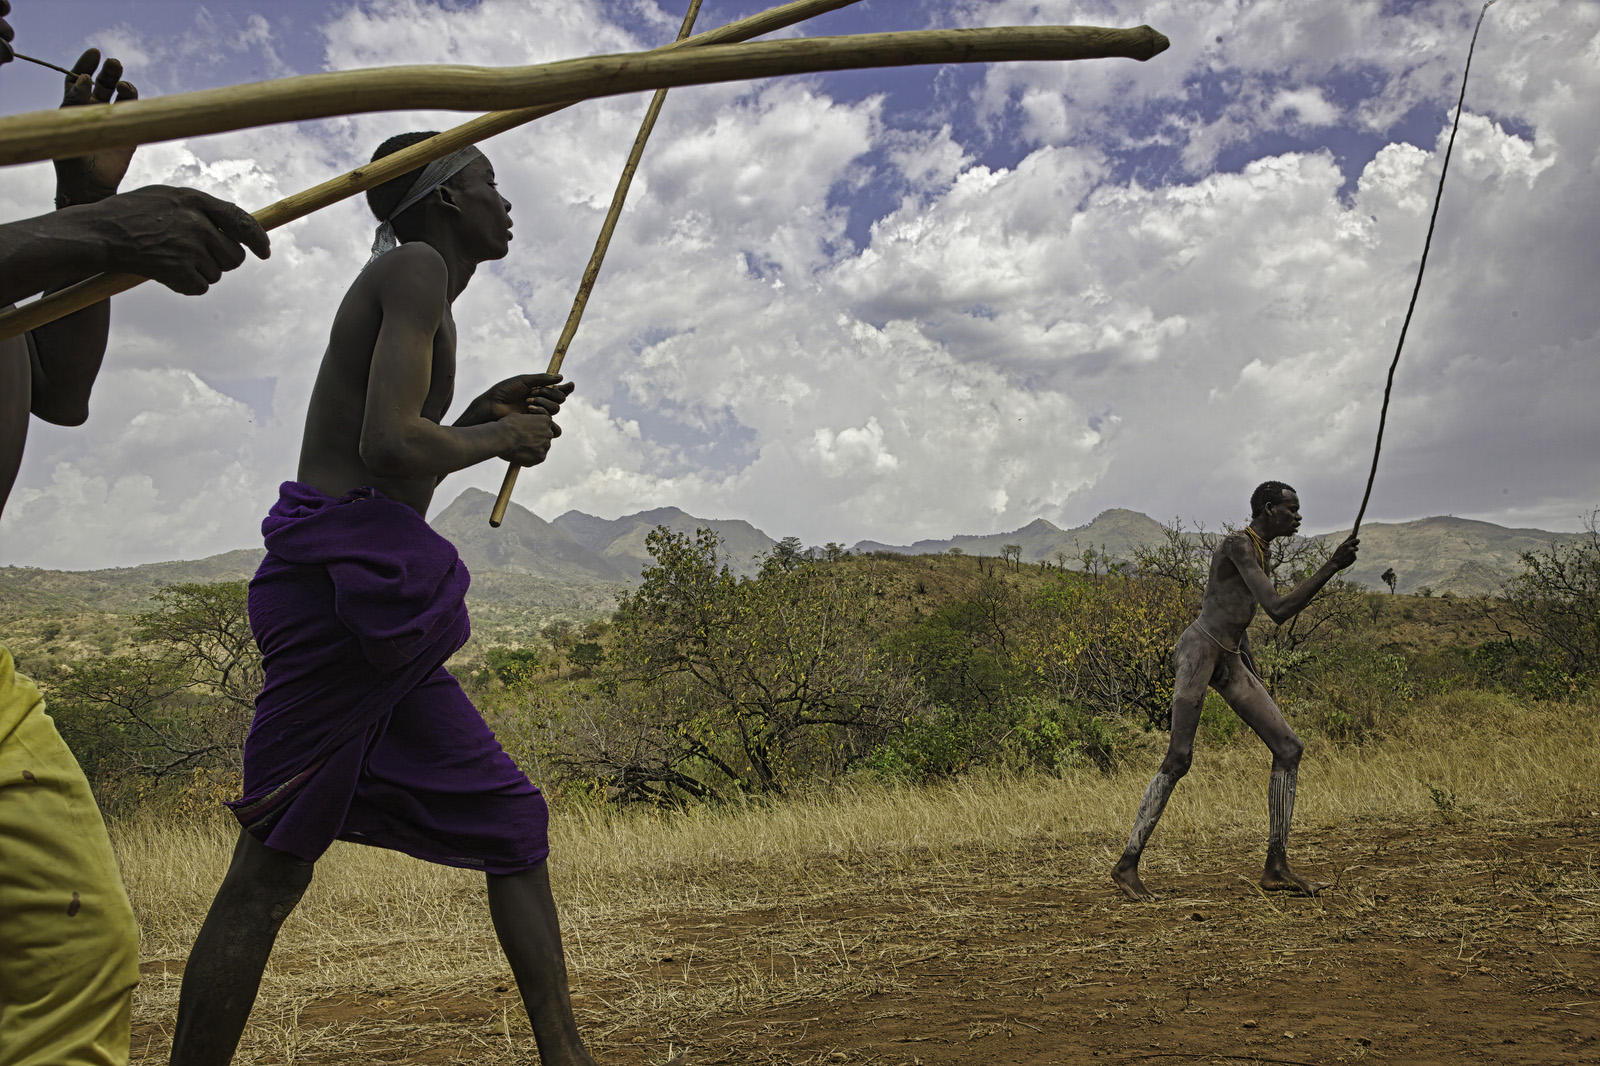 Stick fighting with the - TJ's Wild African Adventures